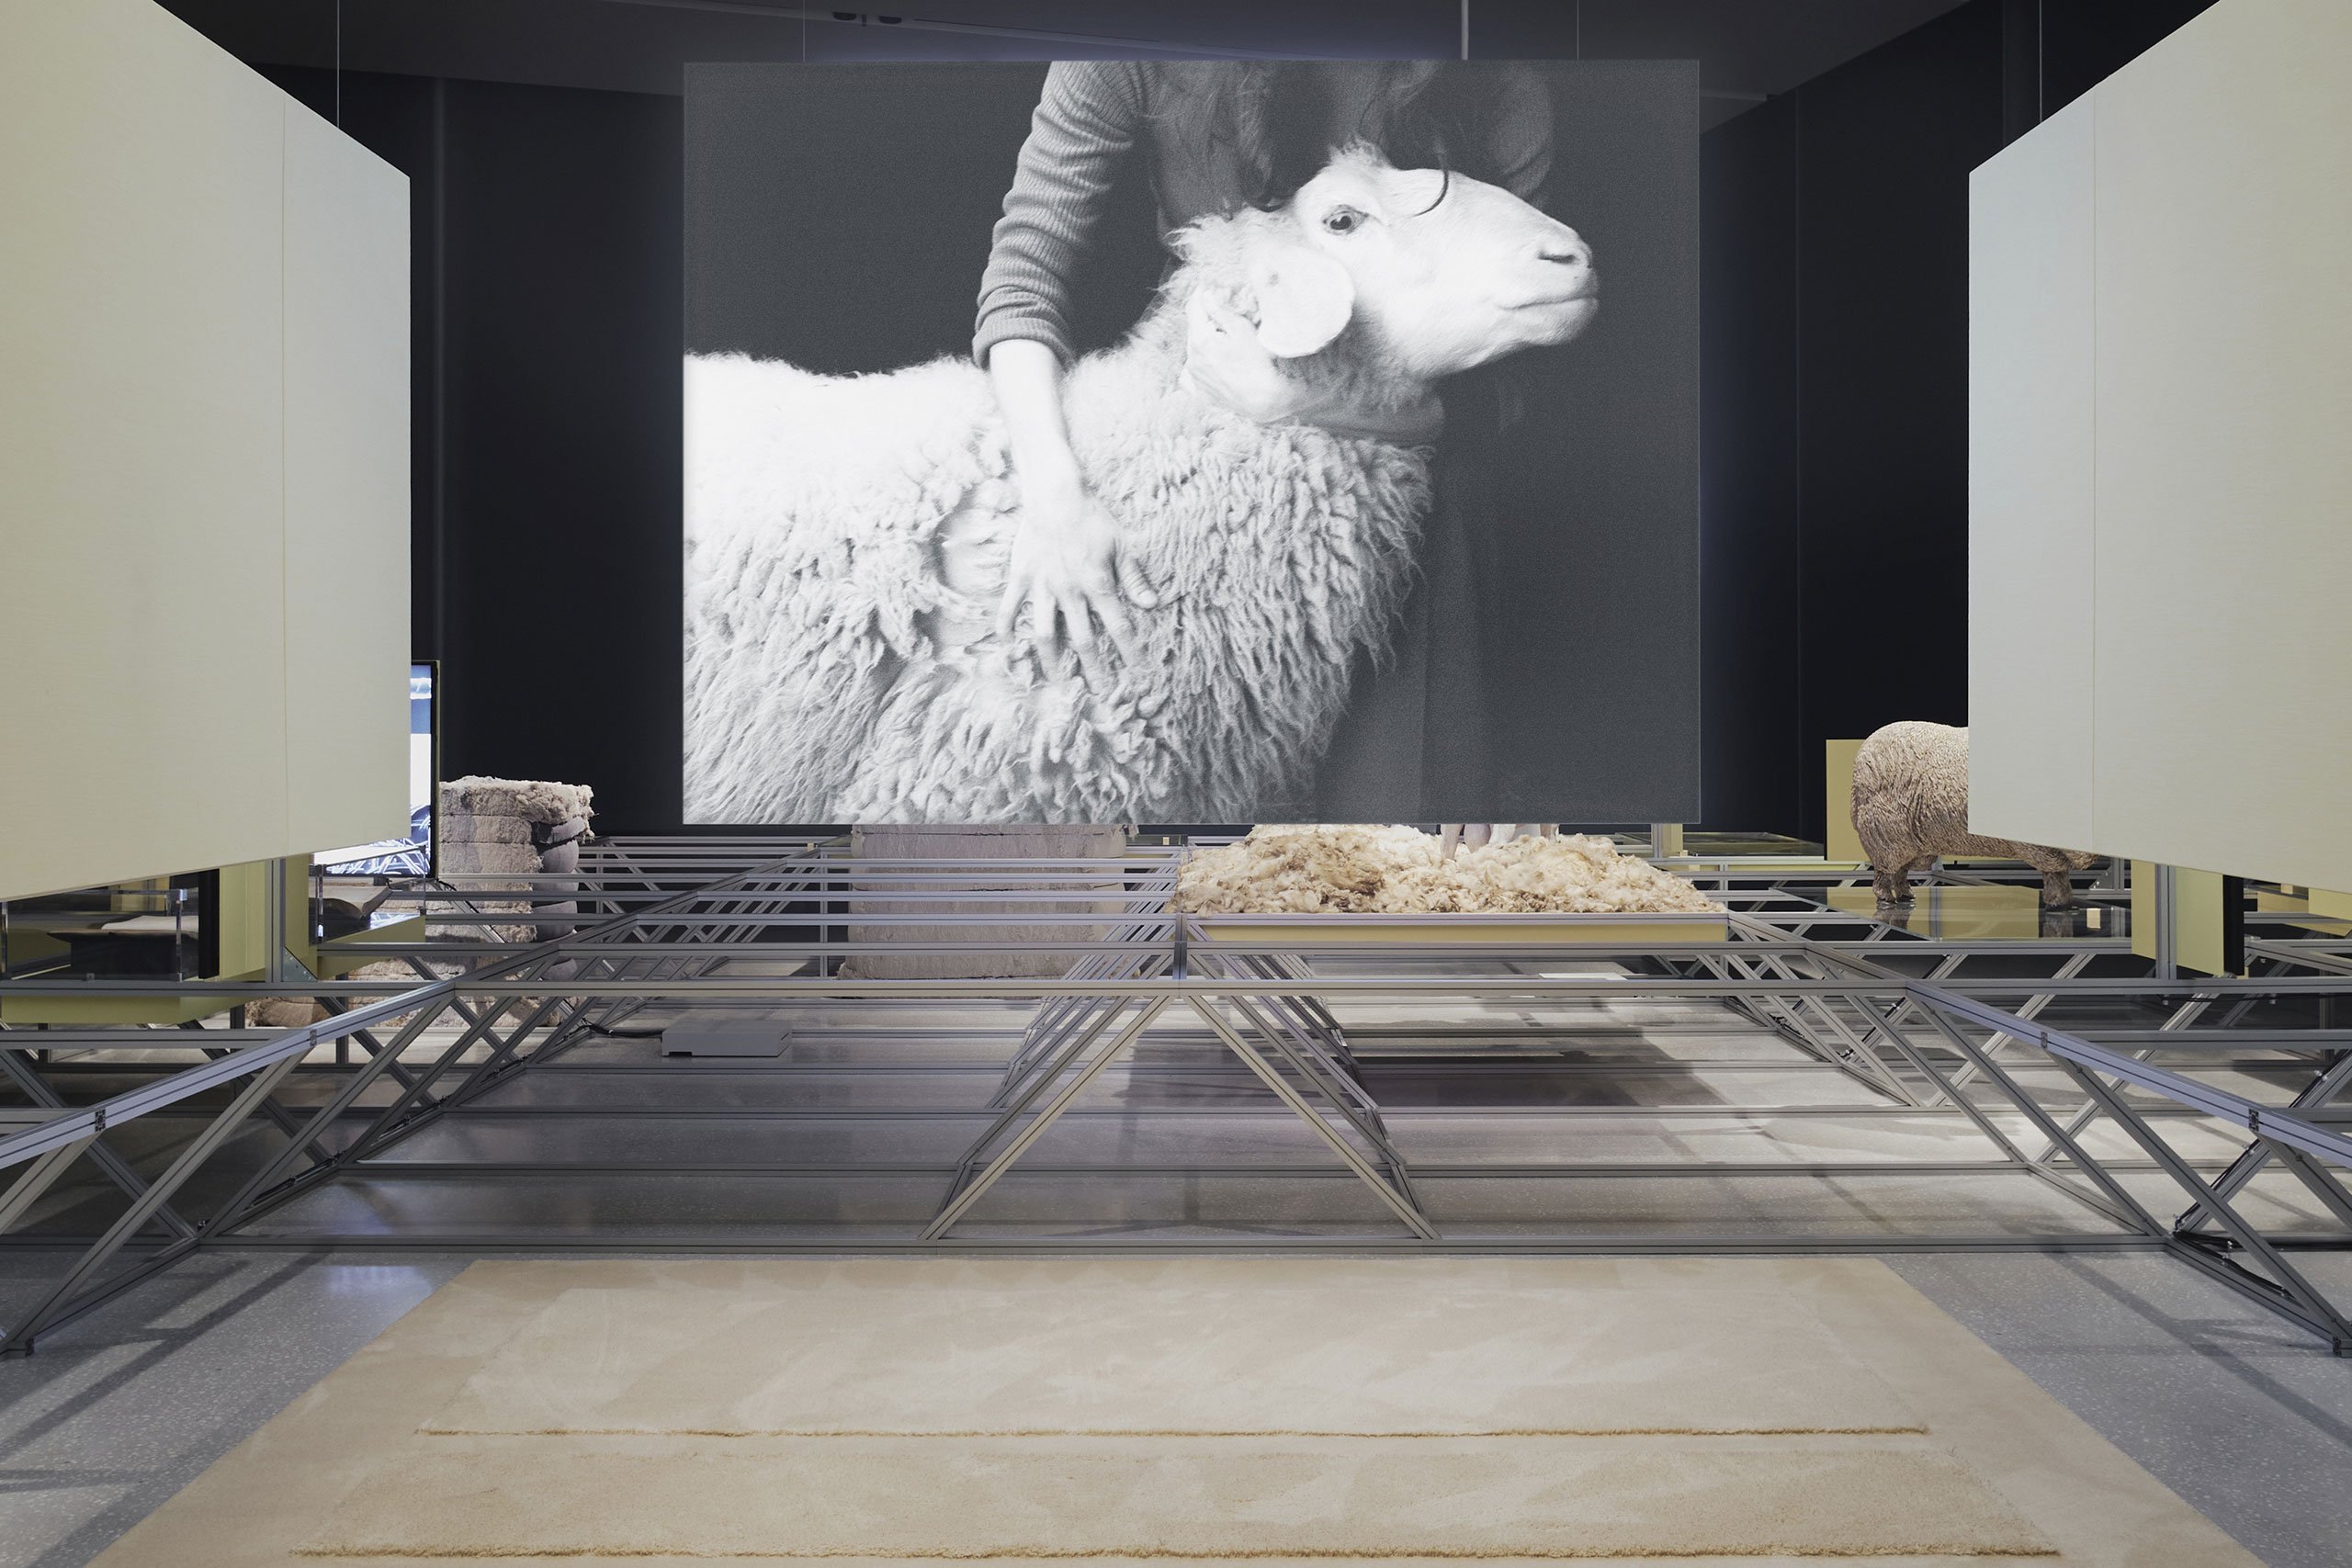 Oltre Terra is an ongoing investigation conducted by Formafantasma focused on the history, ecology, and global dynamics of the extraction and production of wool. Commissioned by the National Museum of Oslo, and curated by Hanne Eide. Photgraphy © Gregorio Gonella.